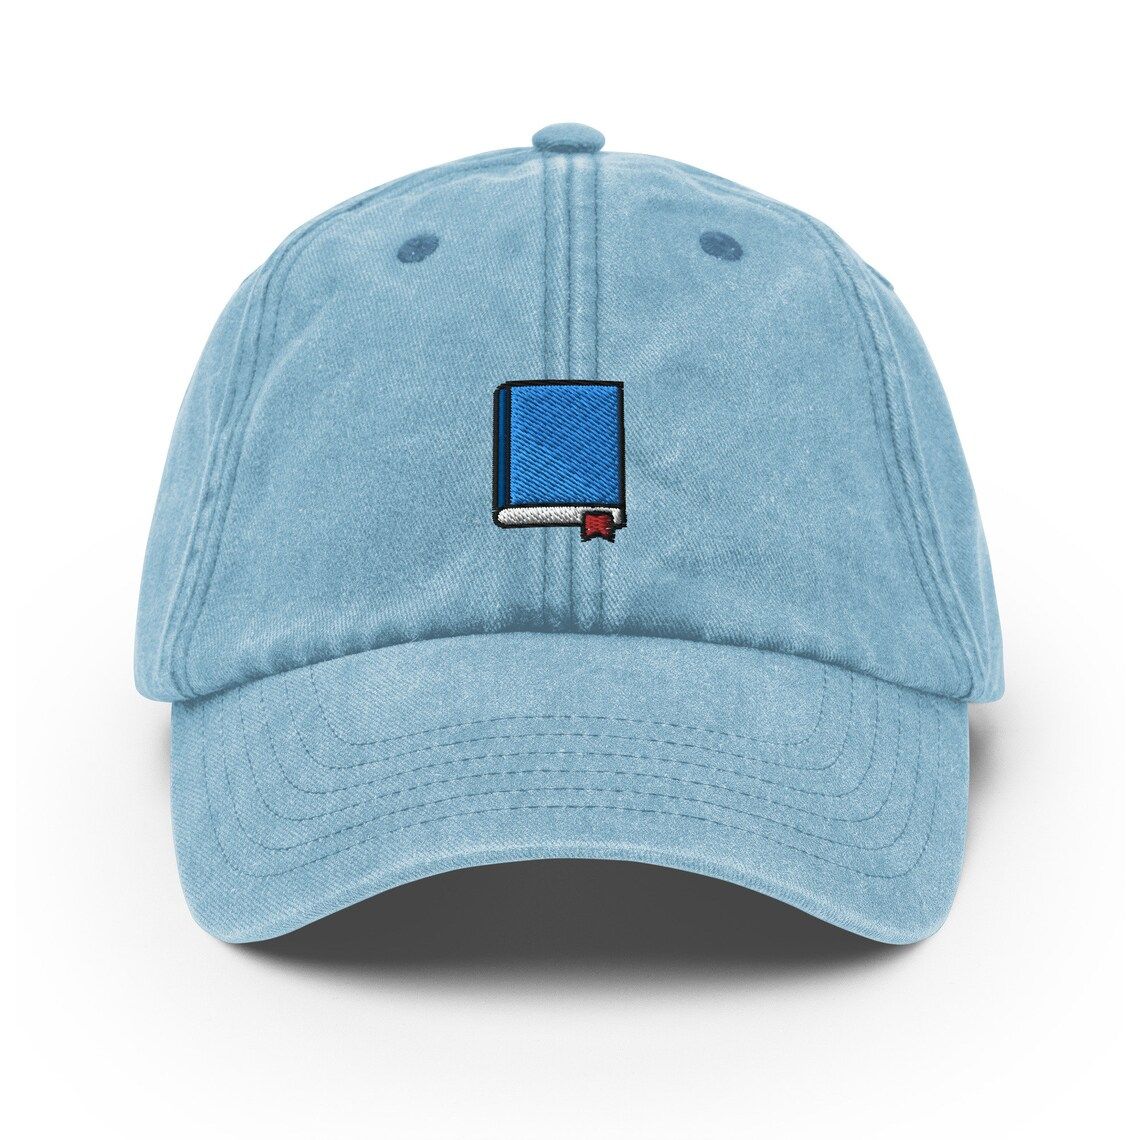 Image of a vintage blue baseball hat with a blue book on it. 